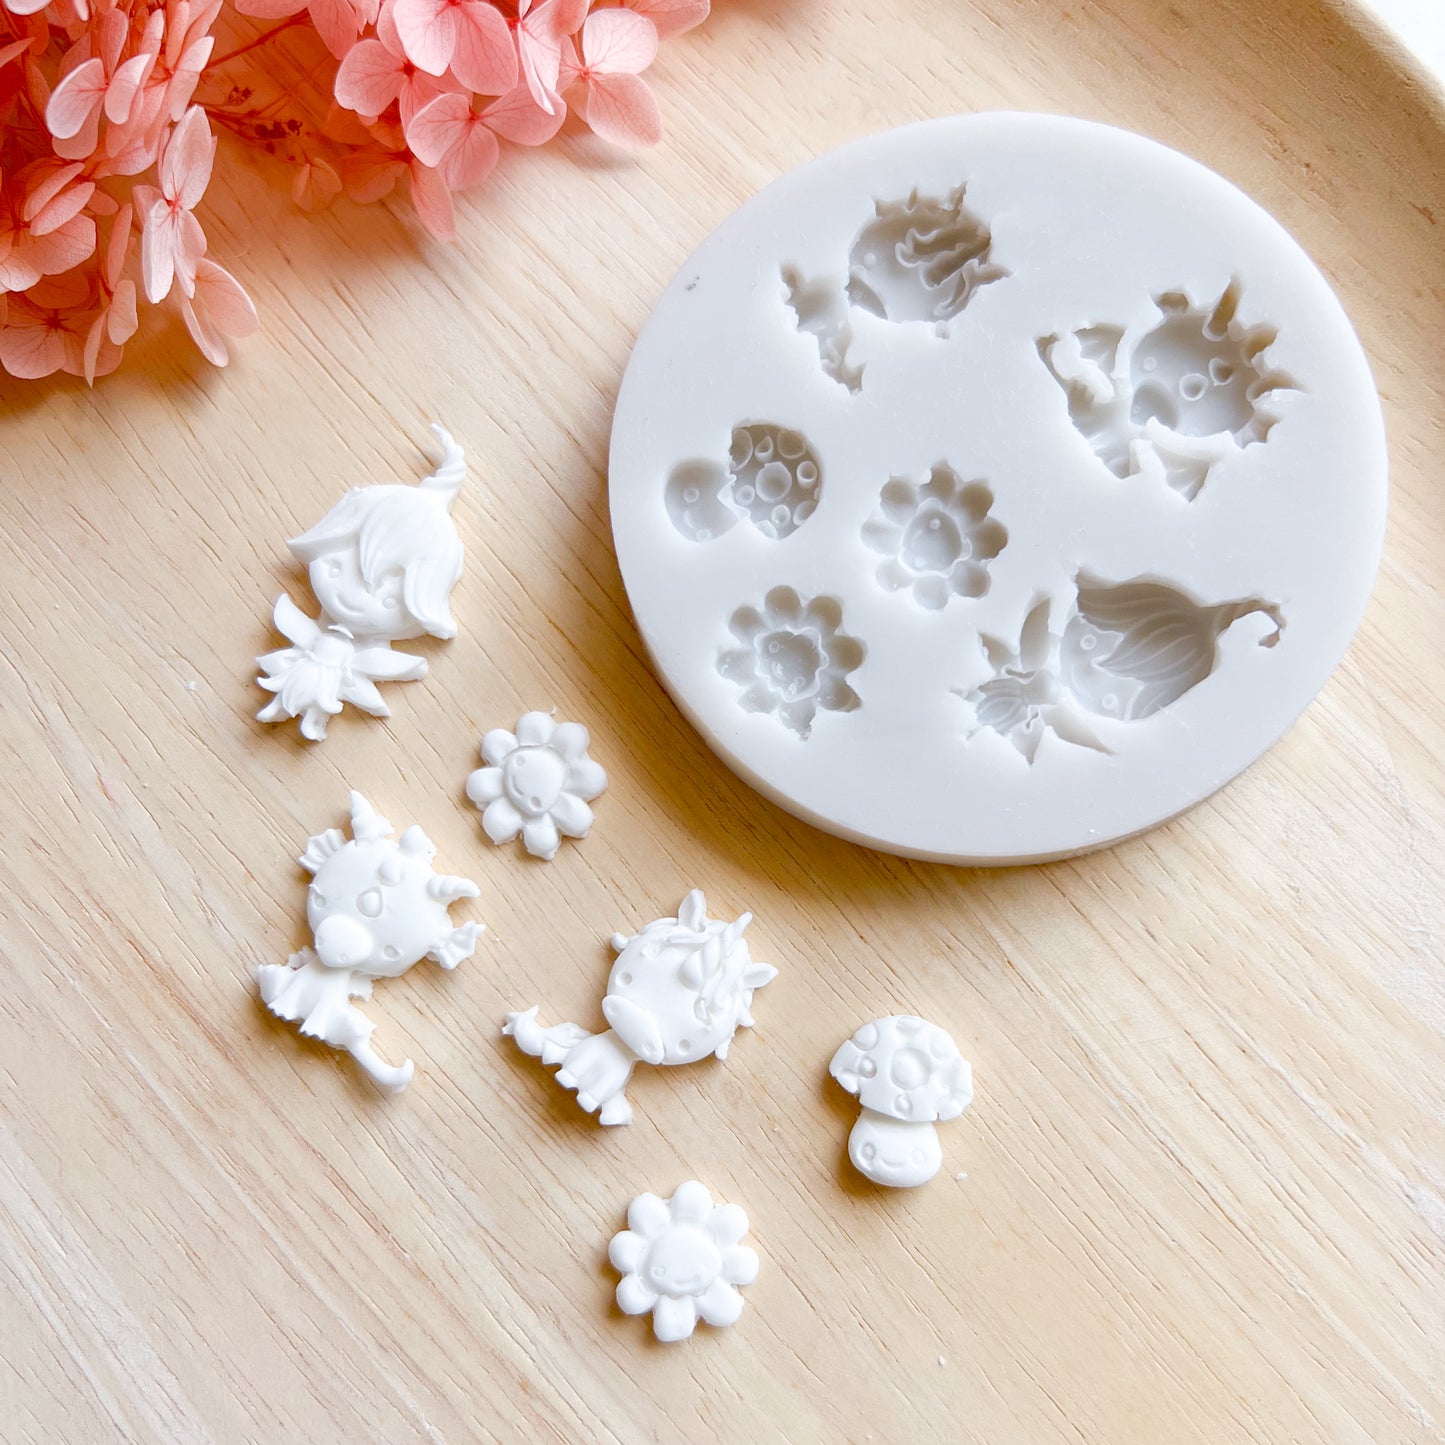 Fairyland Silicone Mould